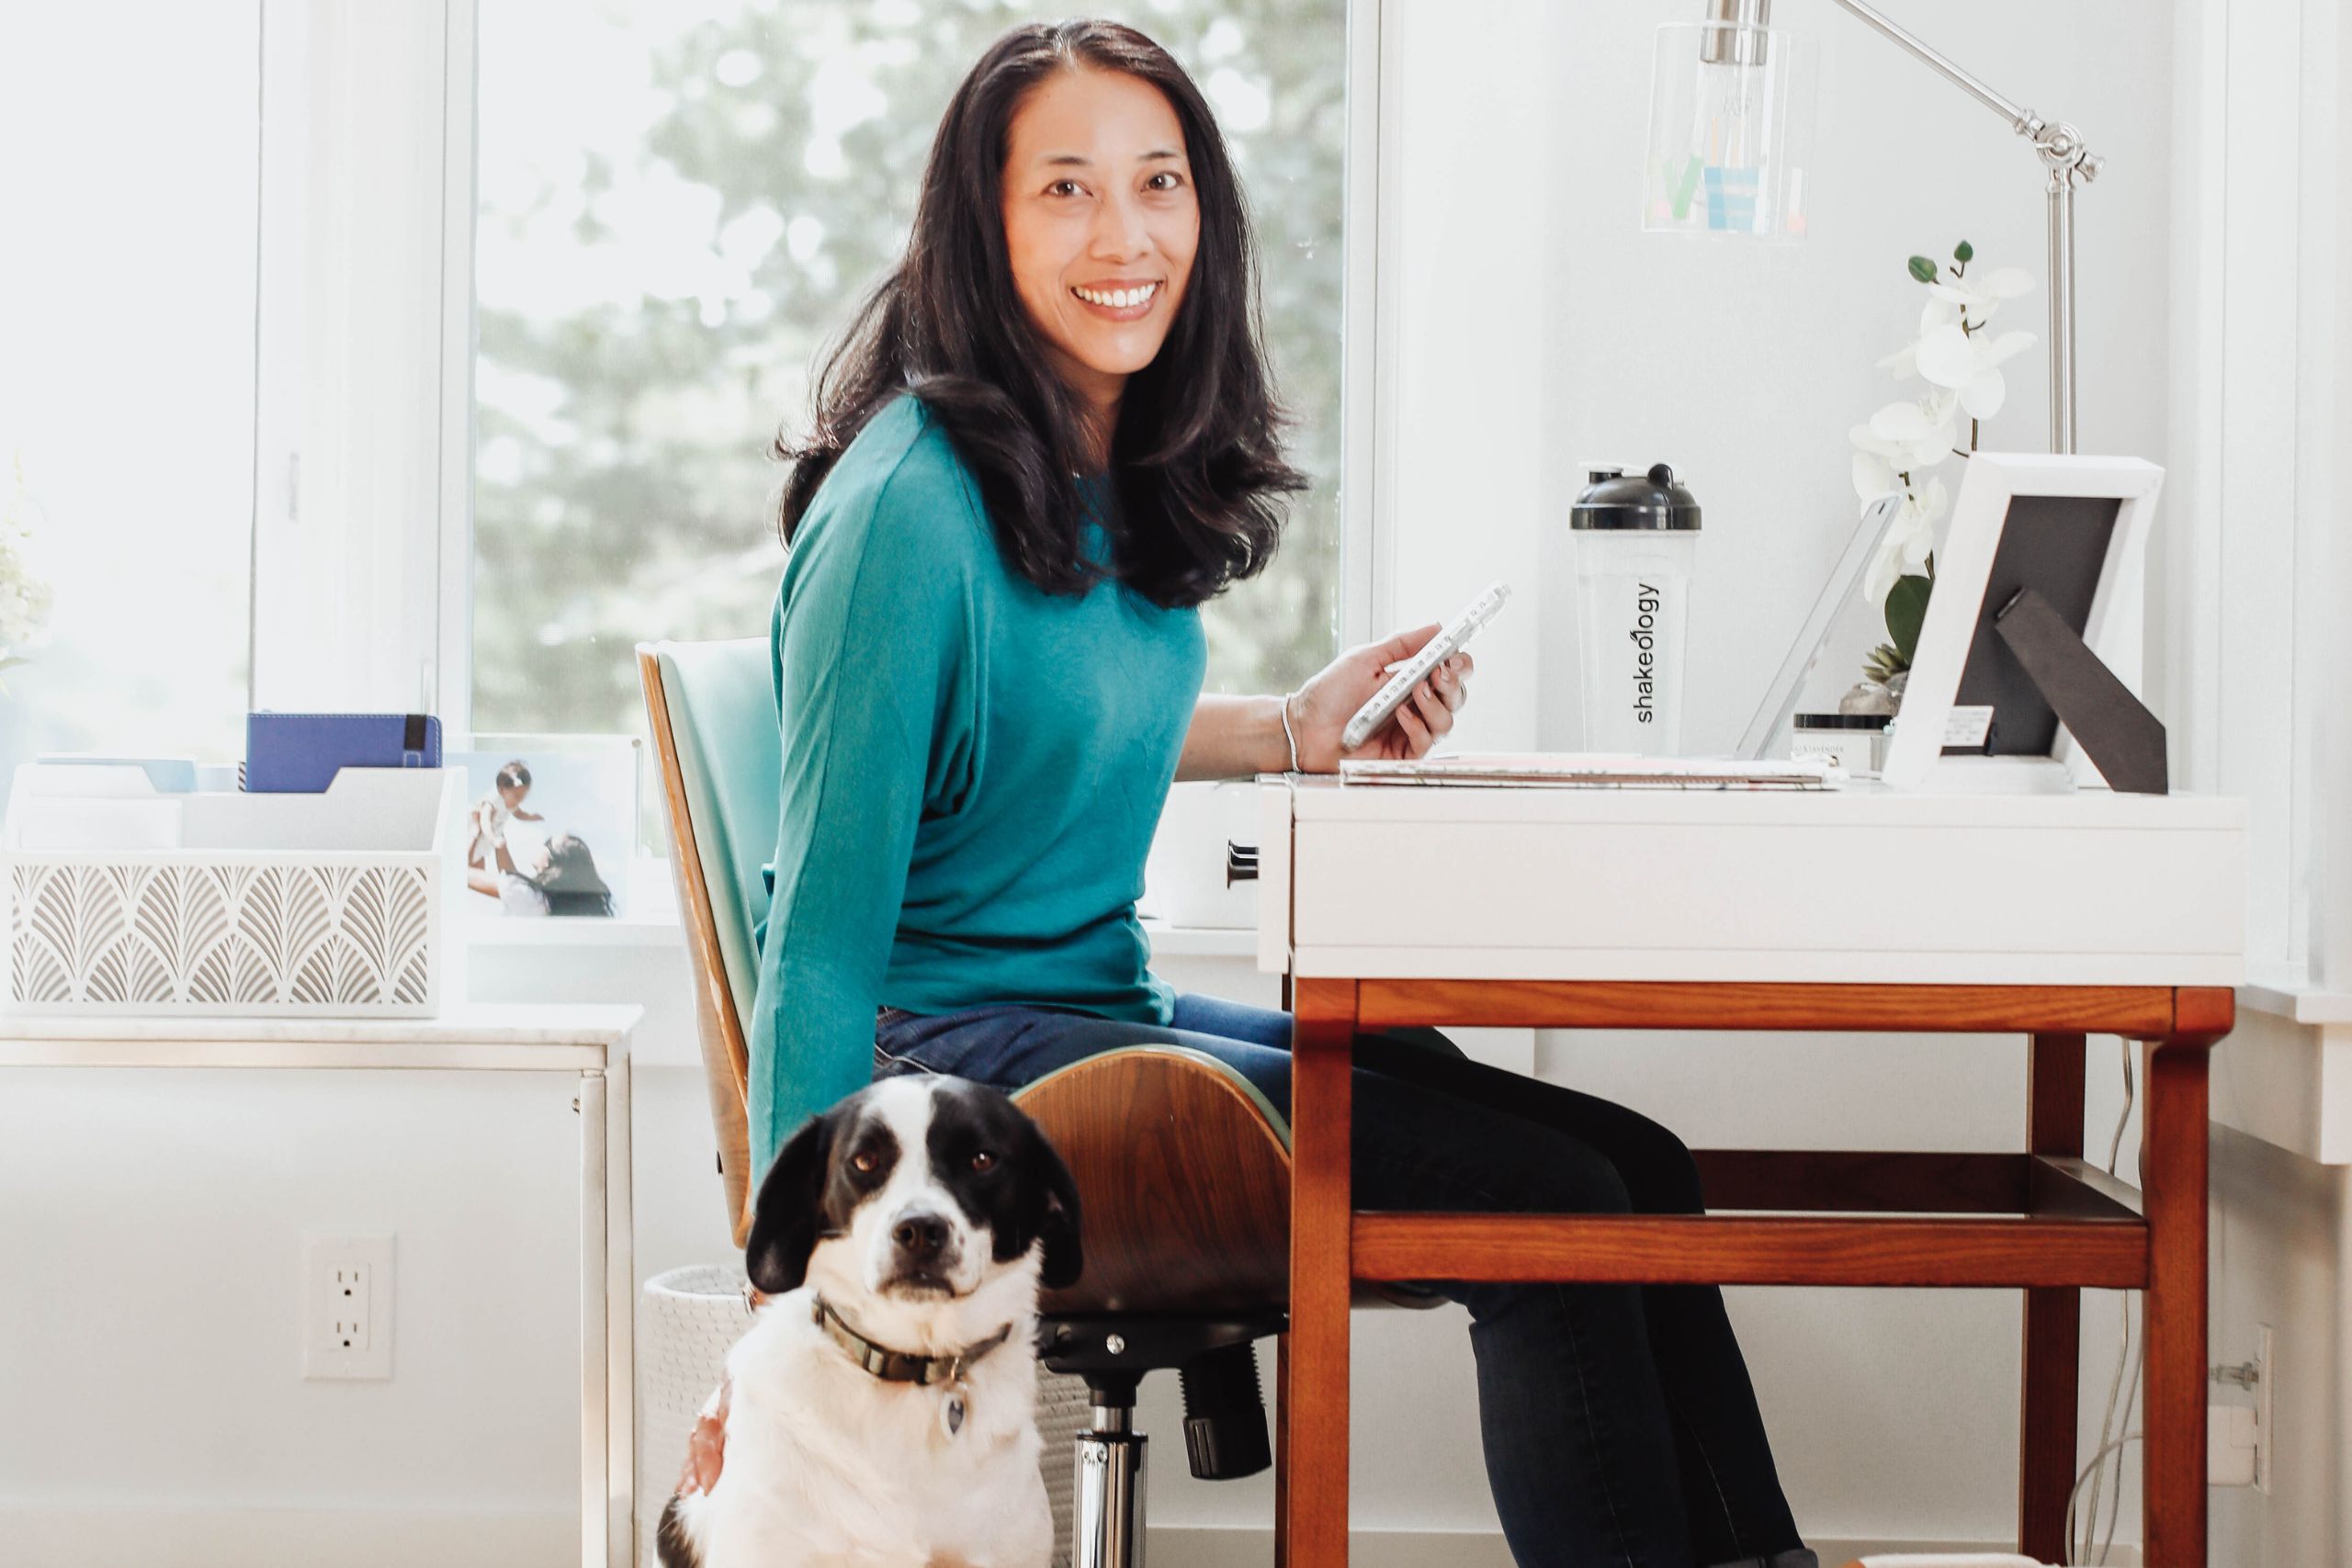 A woman sits at her home office desk and puts her hand on her dog